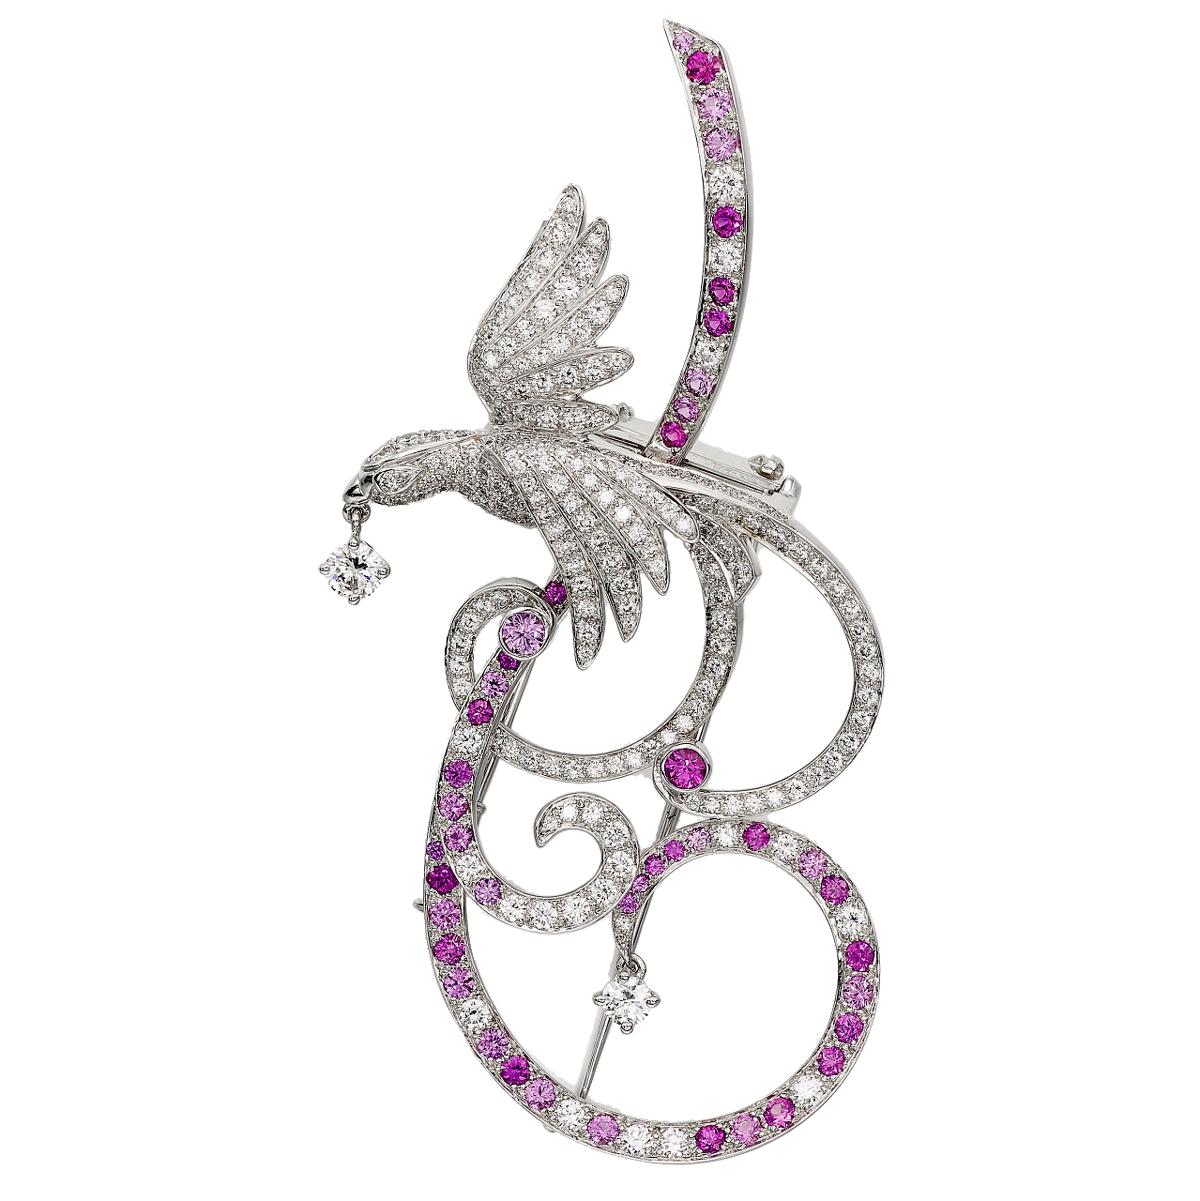 An incredible Van Cleef & Arpels Bird of paradise, set with brilliant-cut diamonds and pink sapphires mounted in 18 karat white gold. The brooch can be worn as a pendant as well and the pink sapphires range from low to strong saturation creating an